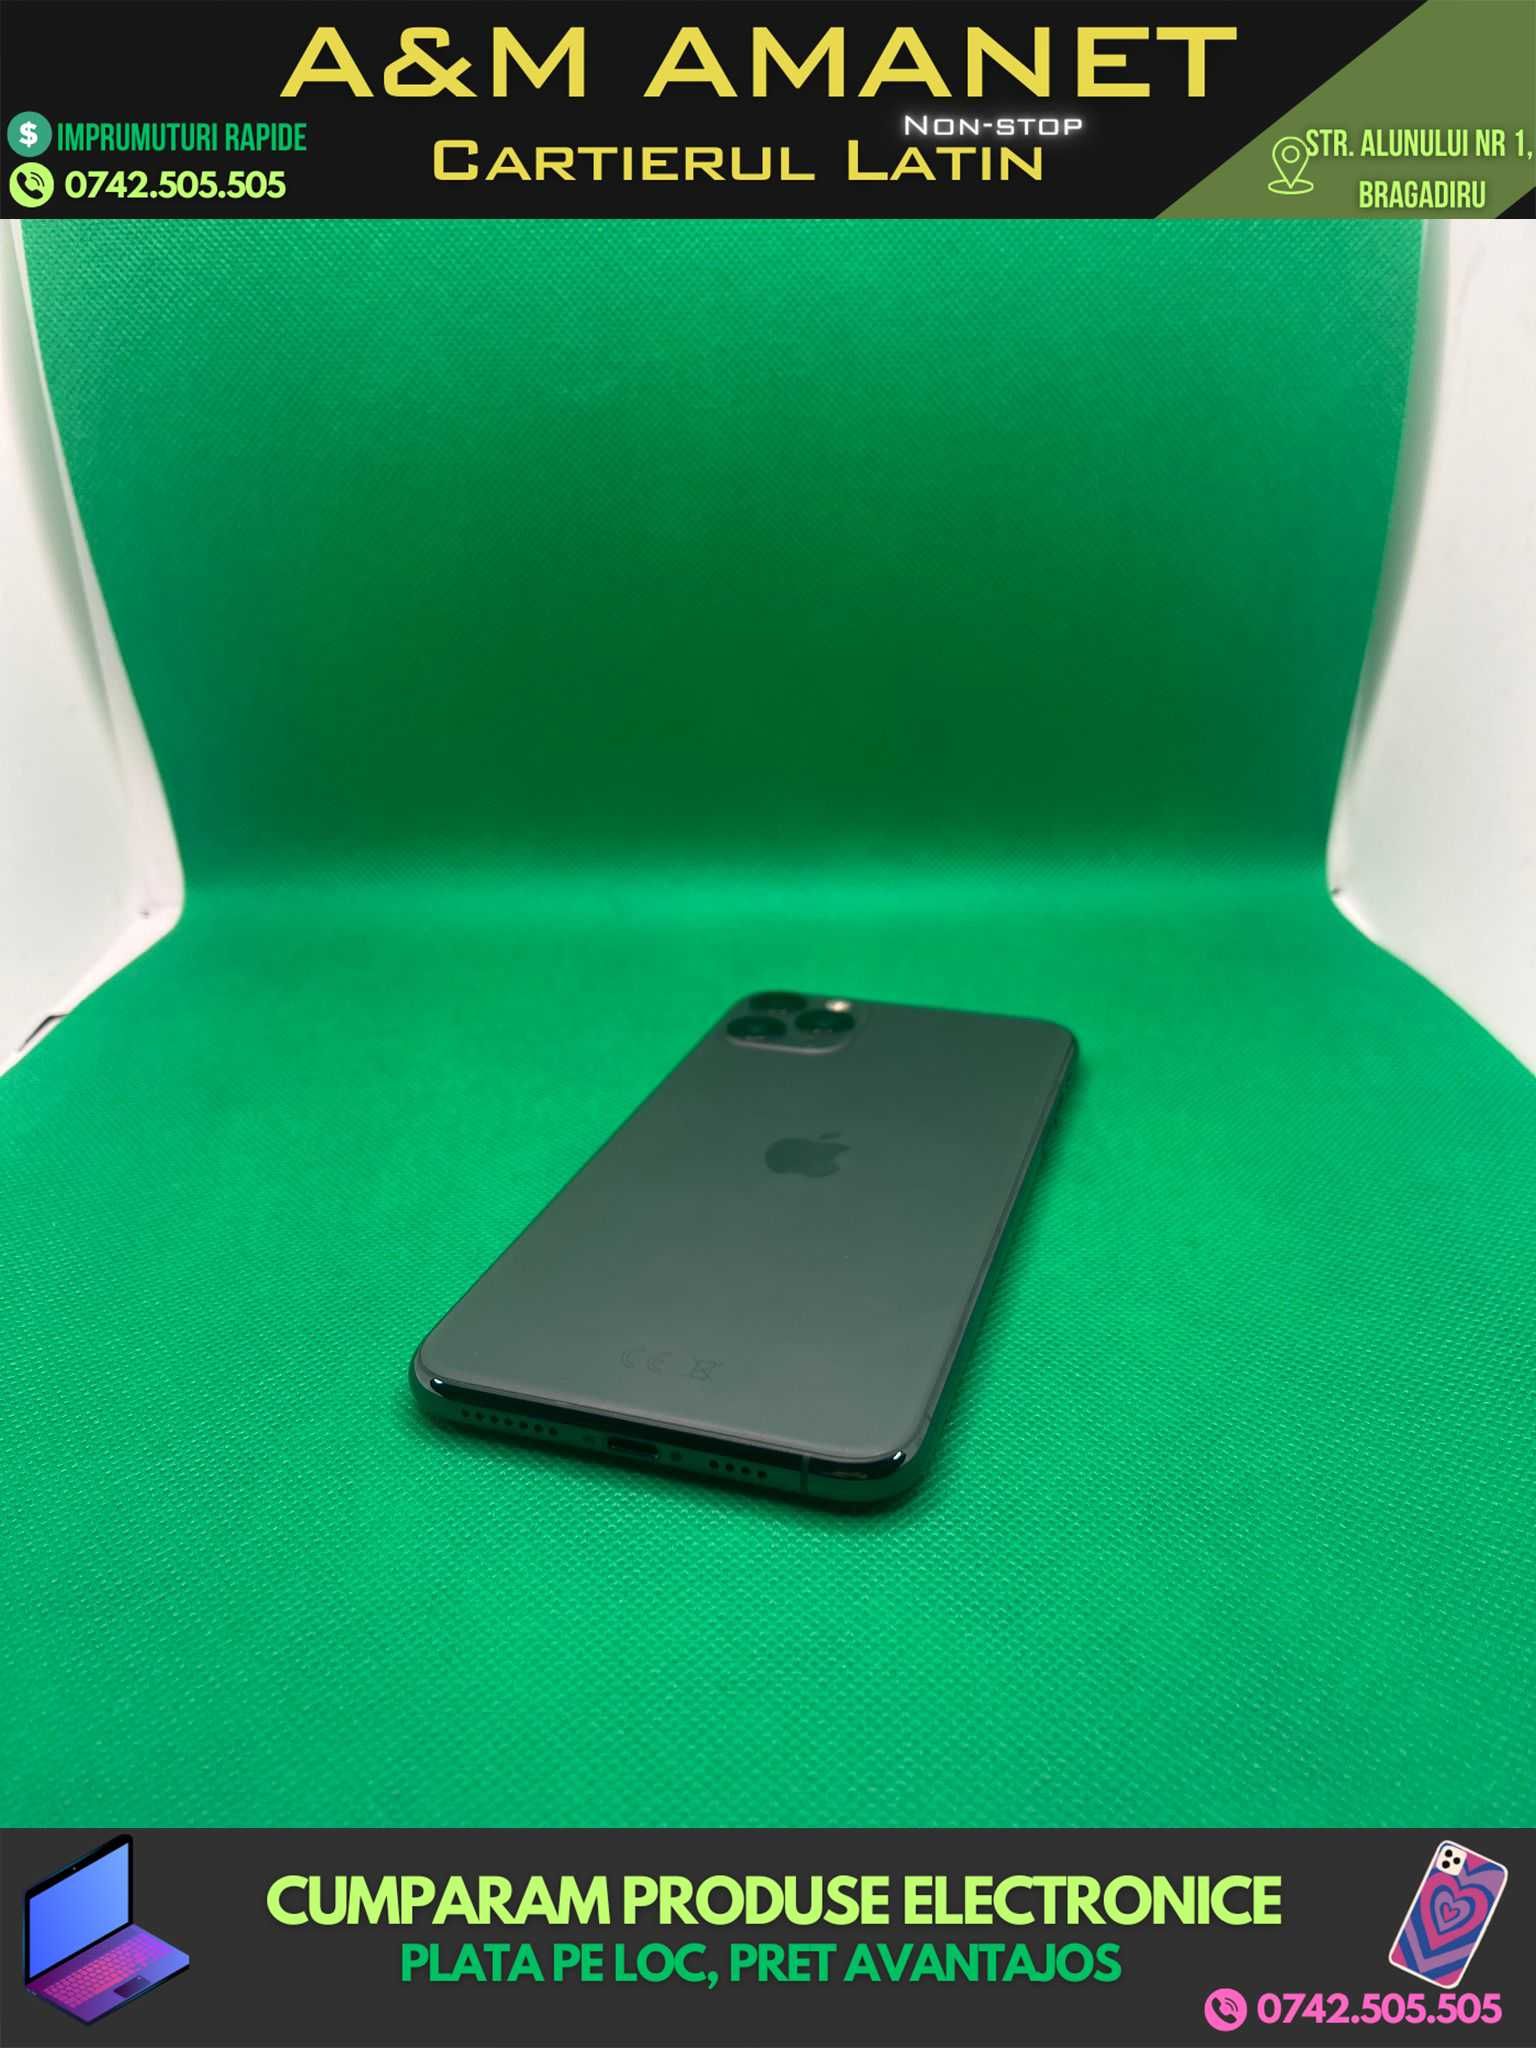 iPhone 11 Pro Max, 256GB, Midnight Green, 85% Baterie (A&M AMANET)